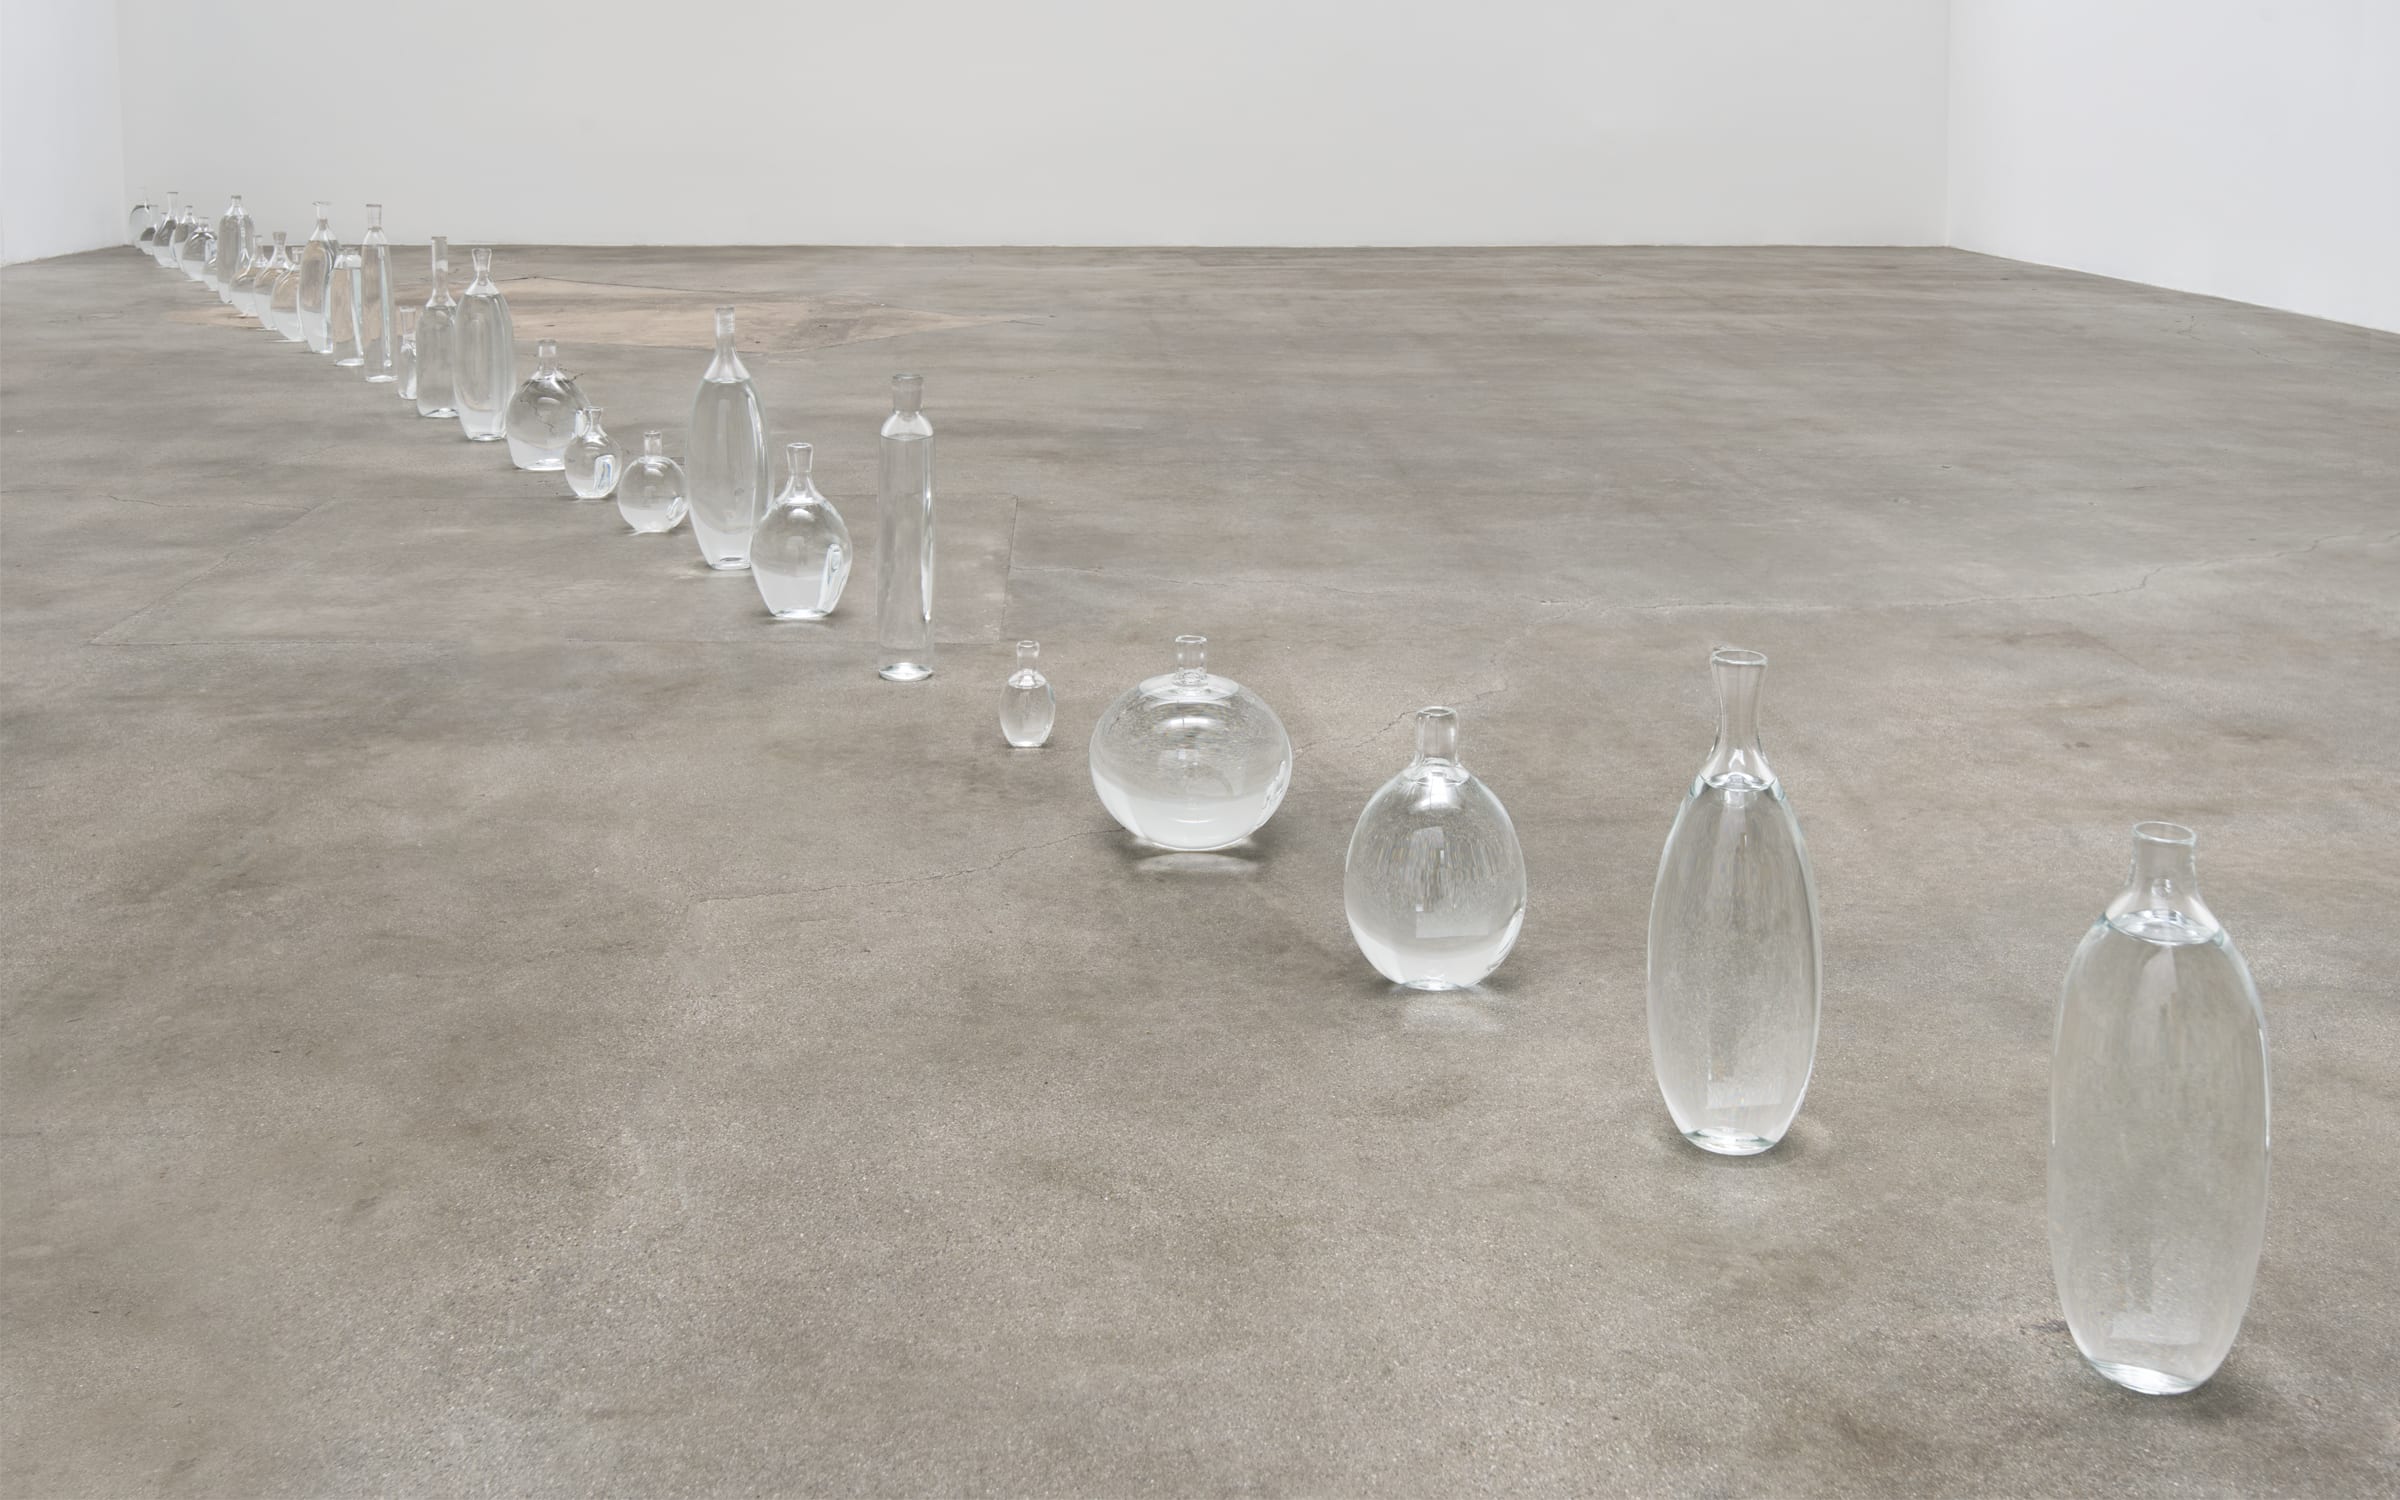 David Horvitz, Somewhere in Between the Jurisdiction of Time (2014), installation view at Blum & Poe, Los Angeles; 32 unique glass vessels holding seawater collected in the Pacific Ocean at longitude line 127.5° west, dimensions variable. Courtesy of the artist and ChertLüdde, Berlin.